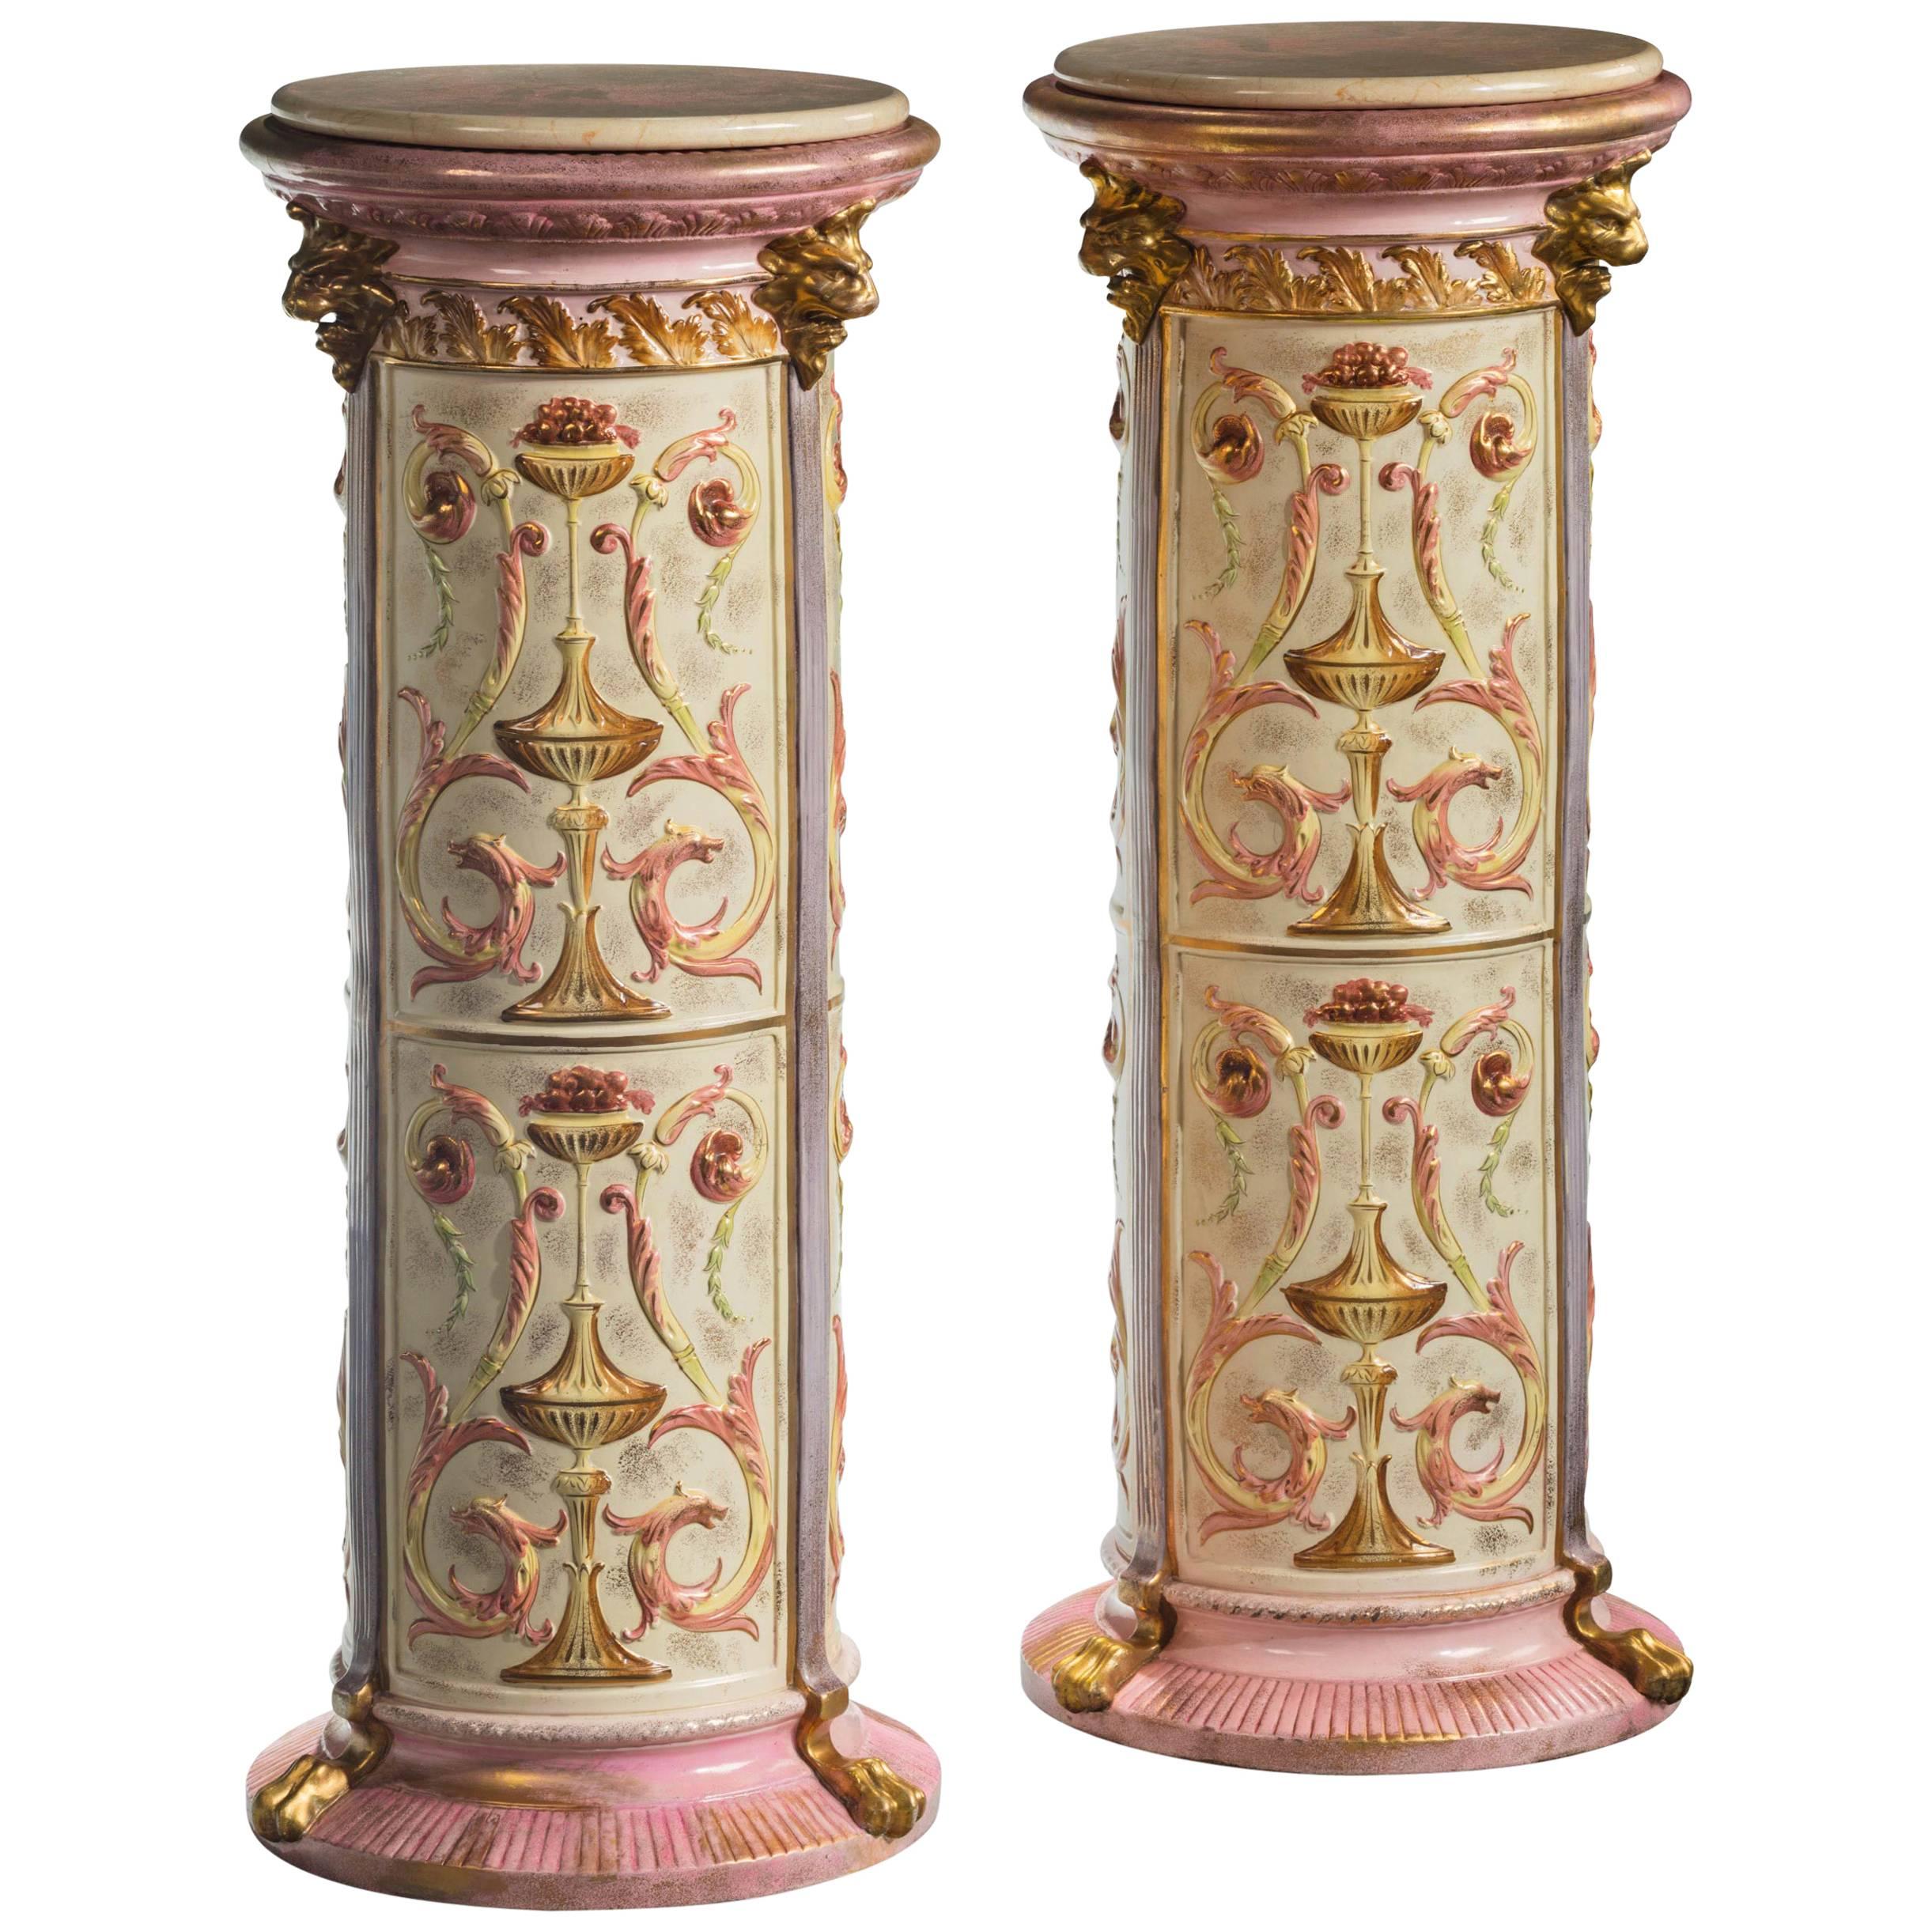 Pair of 19th Century Pottery Columns with Scroll and Neoclassic Decoration